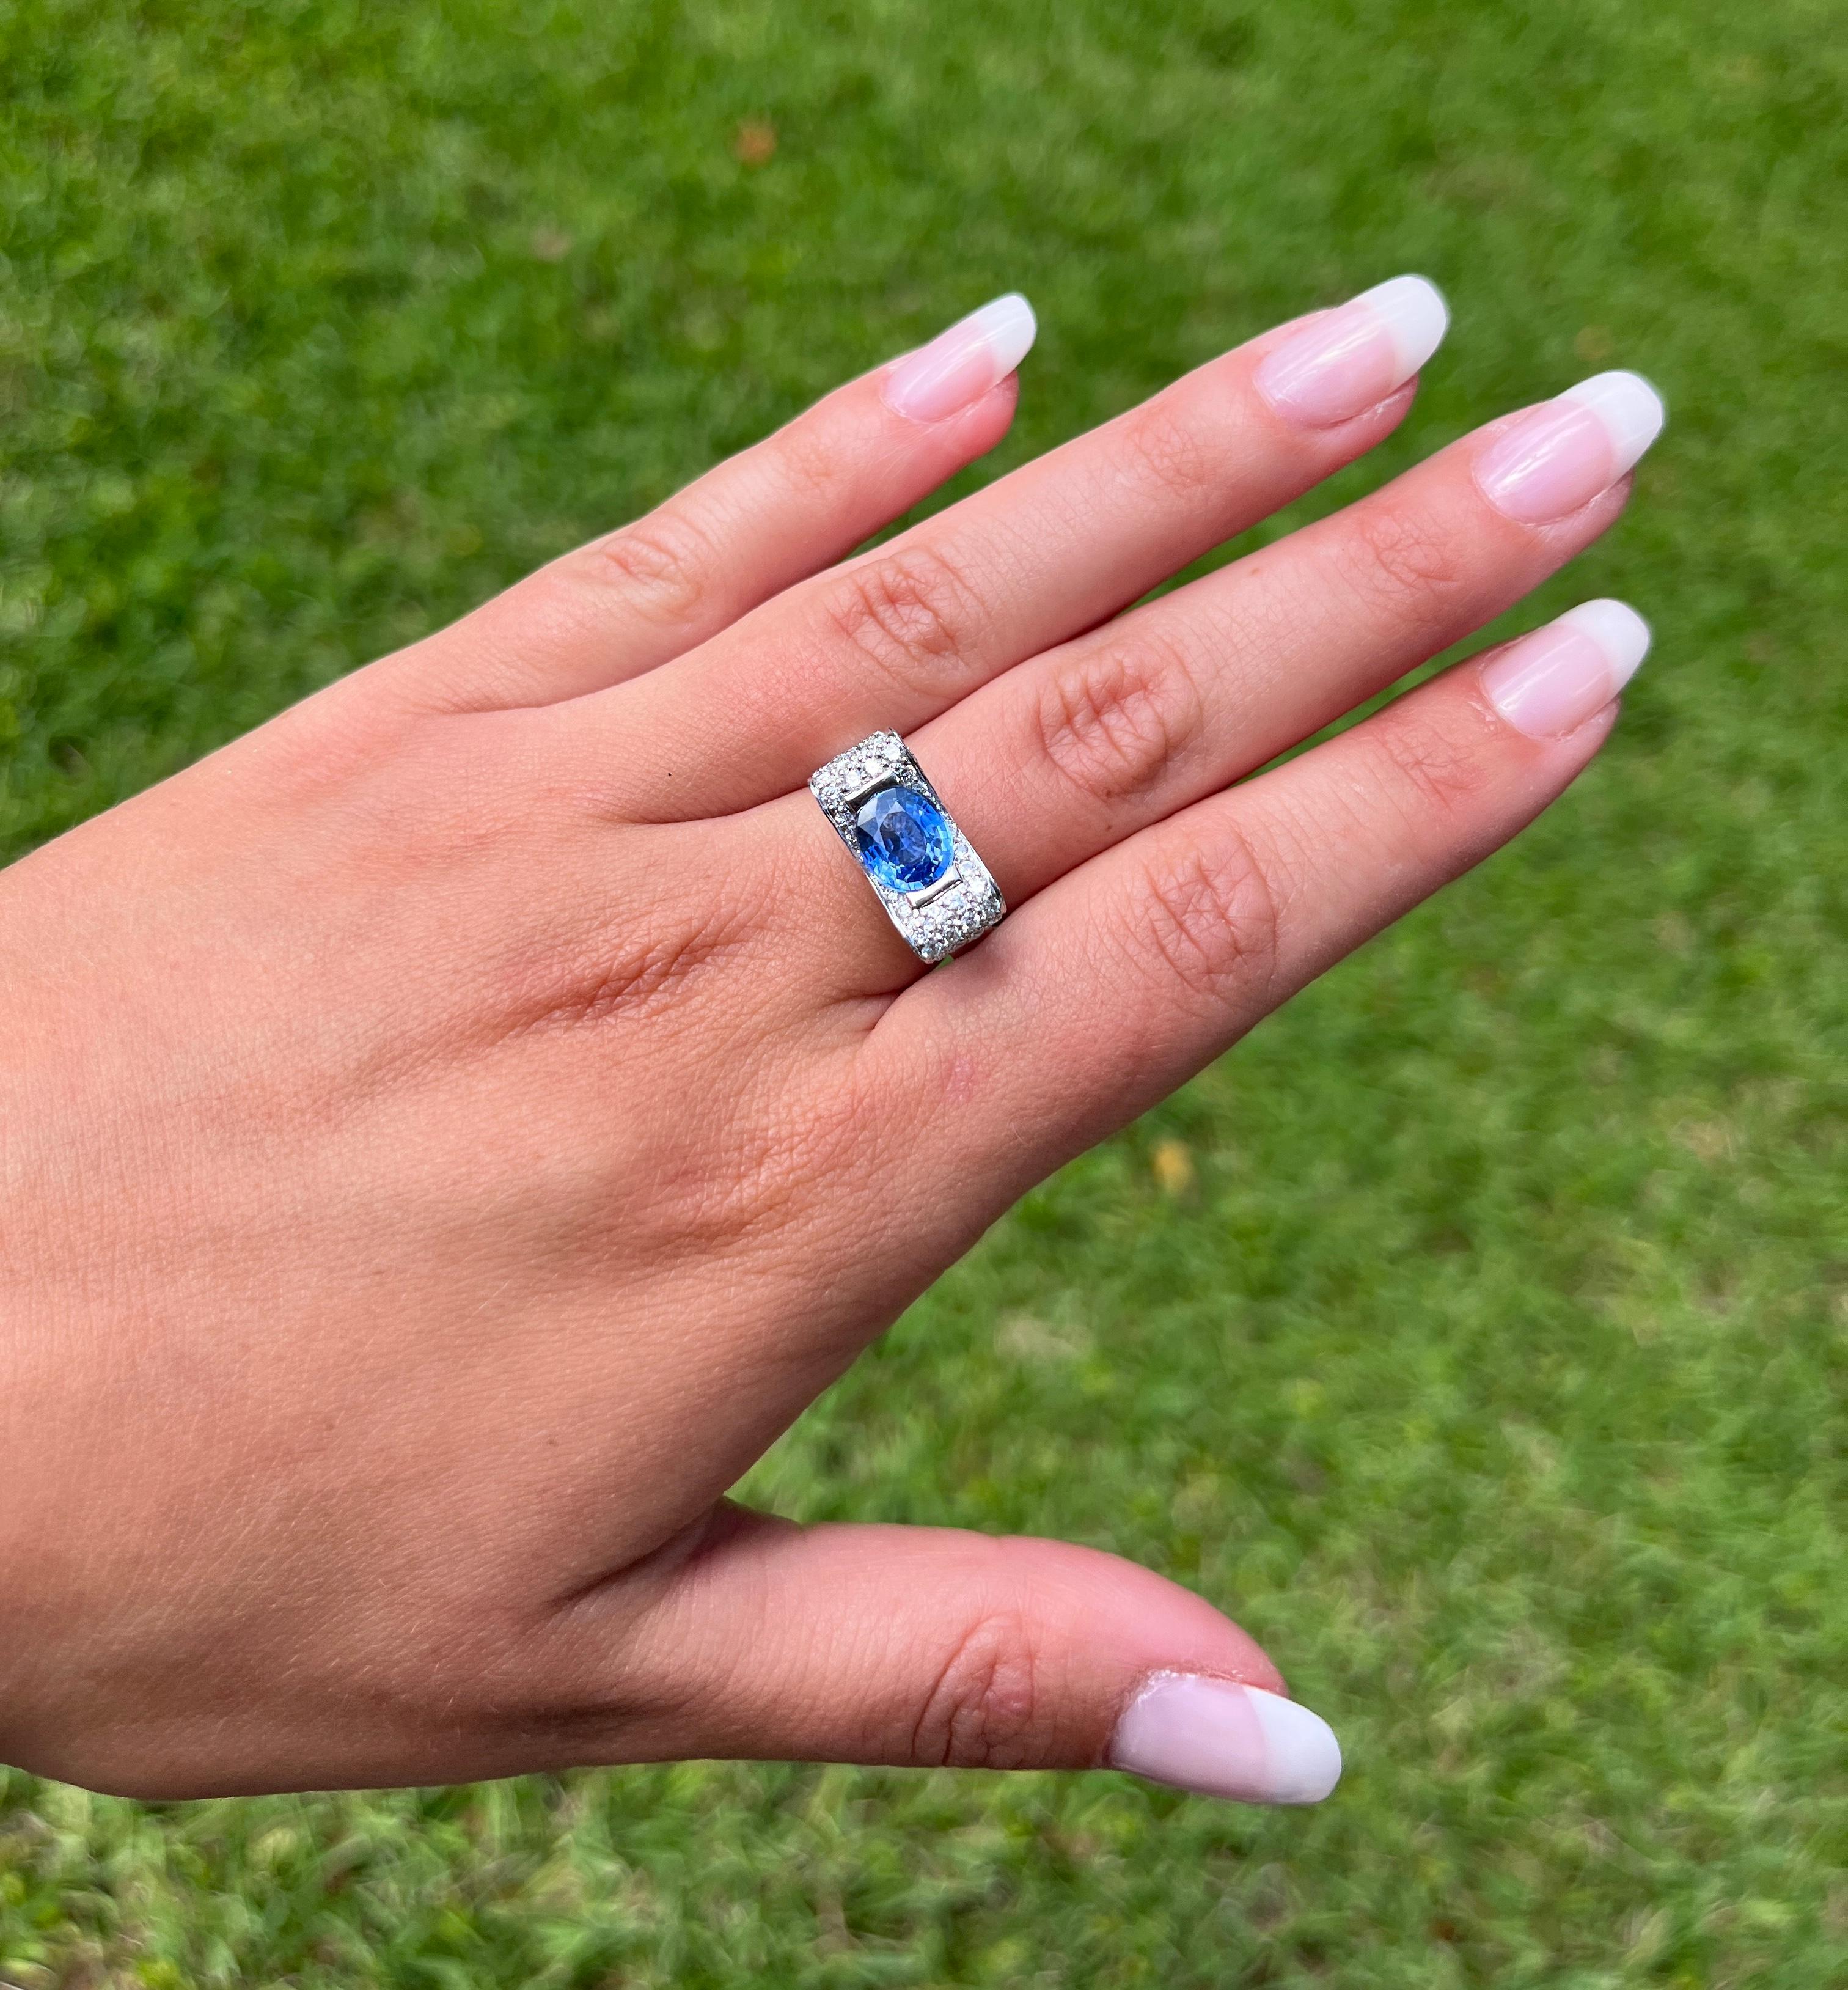 Natural Tanzanite and Diamond Bow Style Ring, featuring a captivating 2.20 carat Blue dominant Tanzanite, half bezel-set, and adorned with 1.01 CTTW in round cut diamond side stones. Crafted in 18K white gold, this ring beautifully combines the